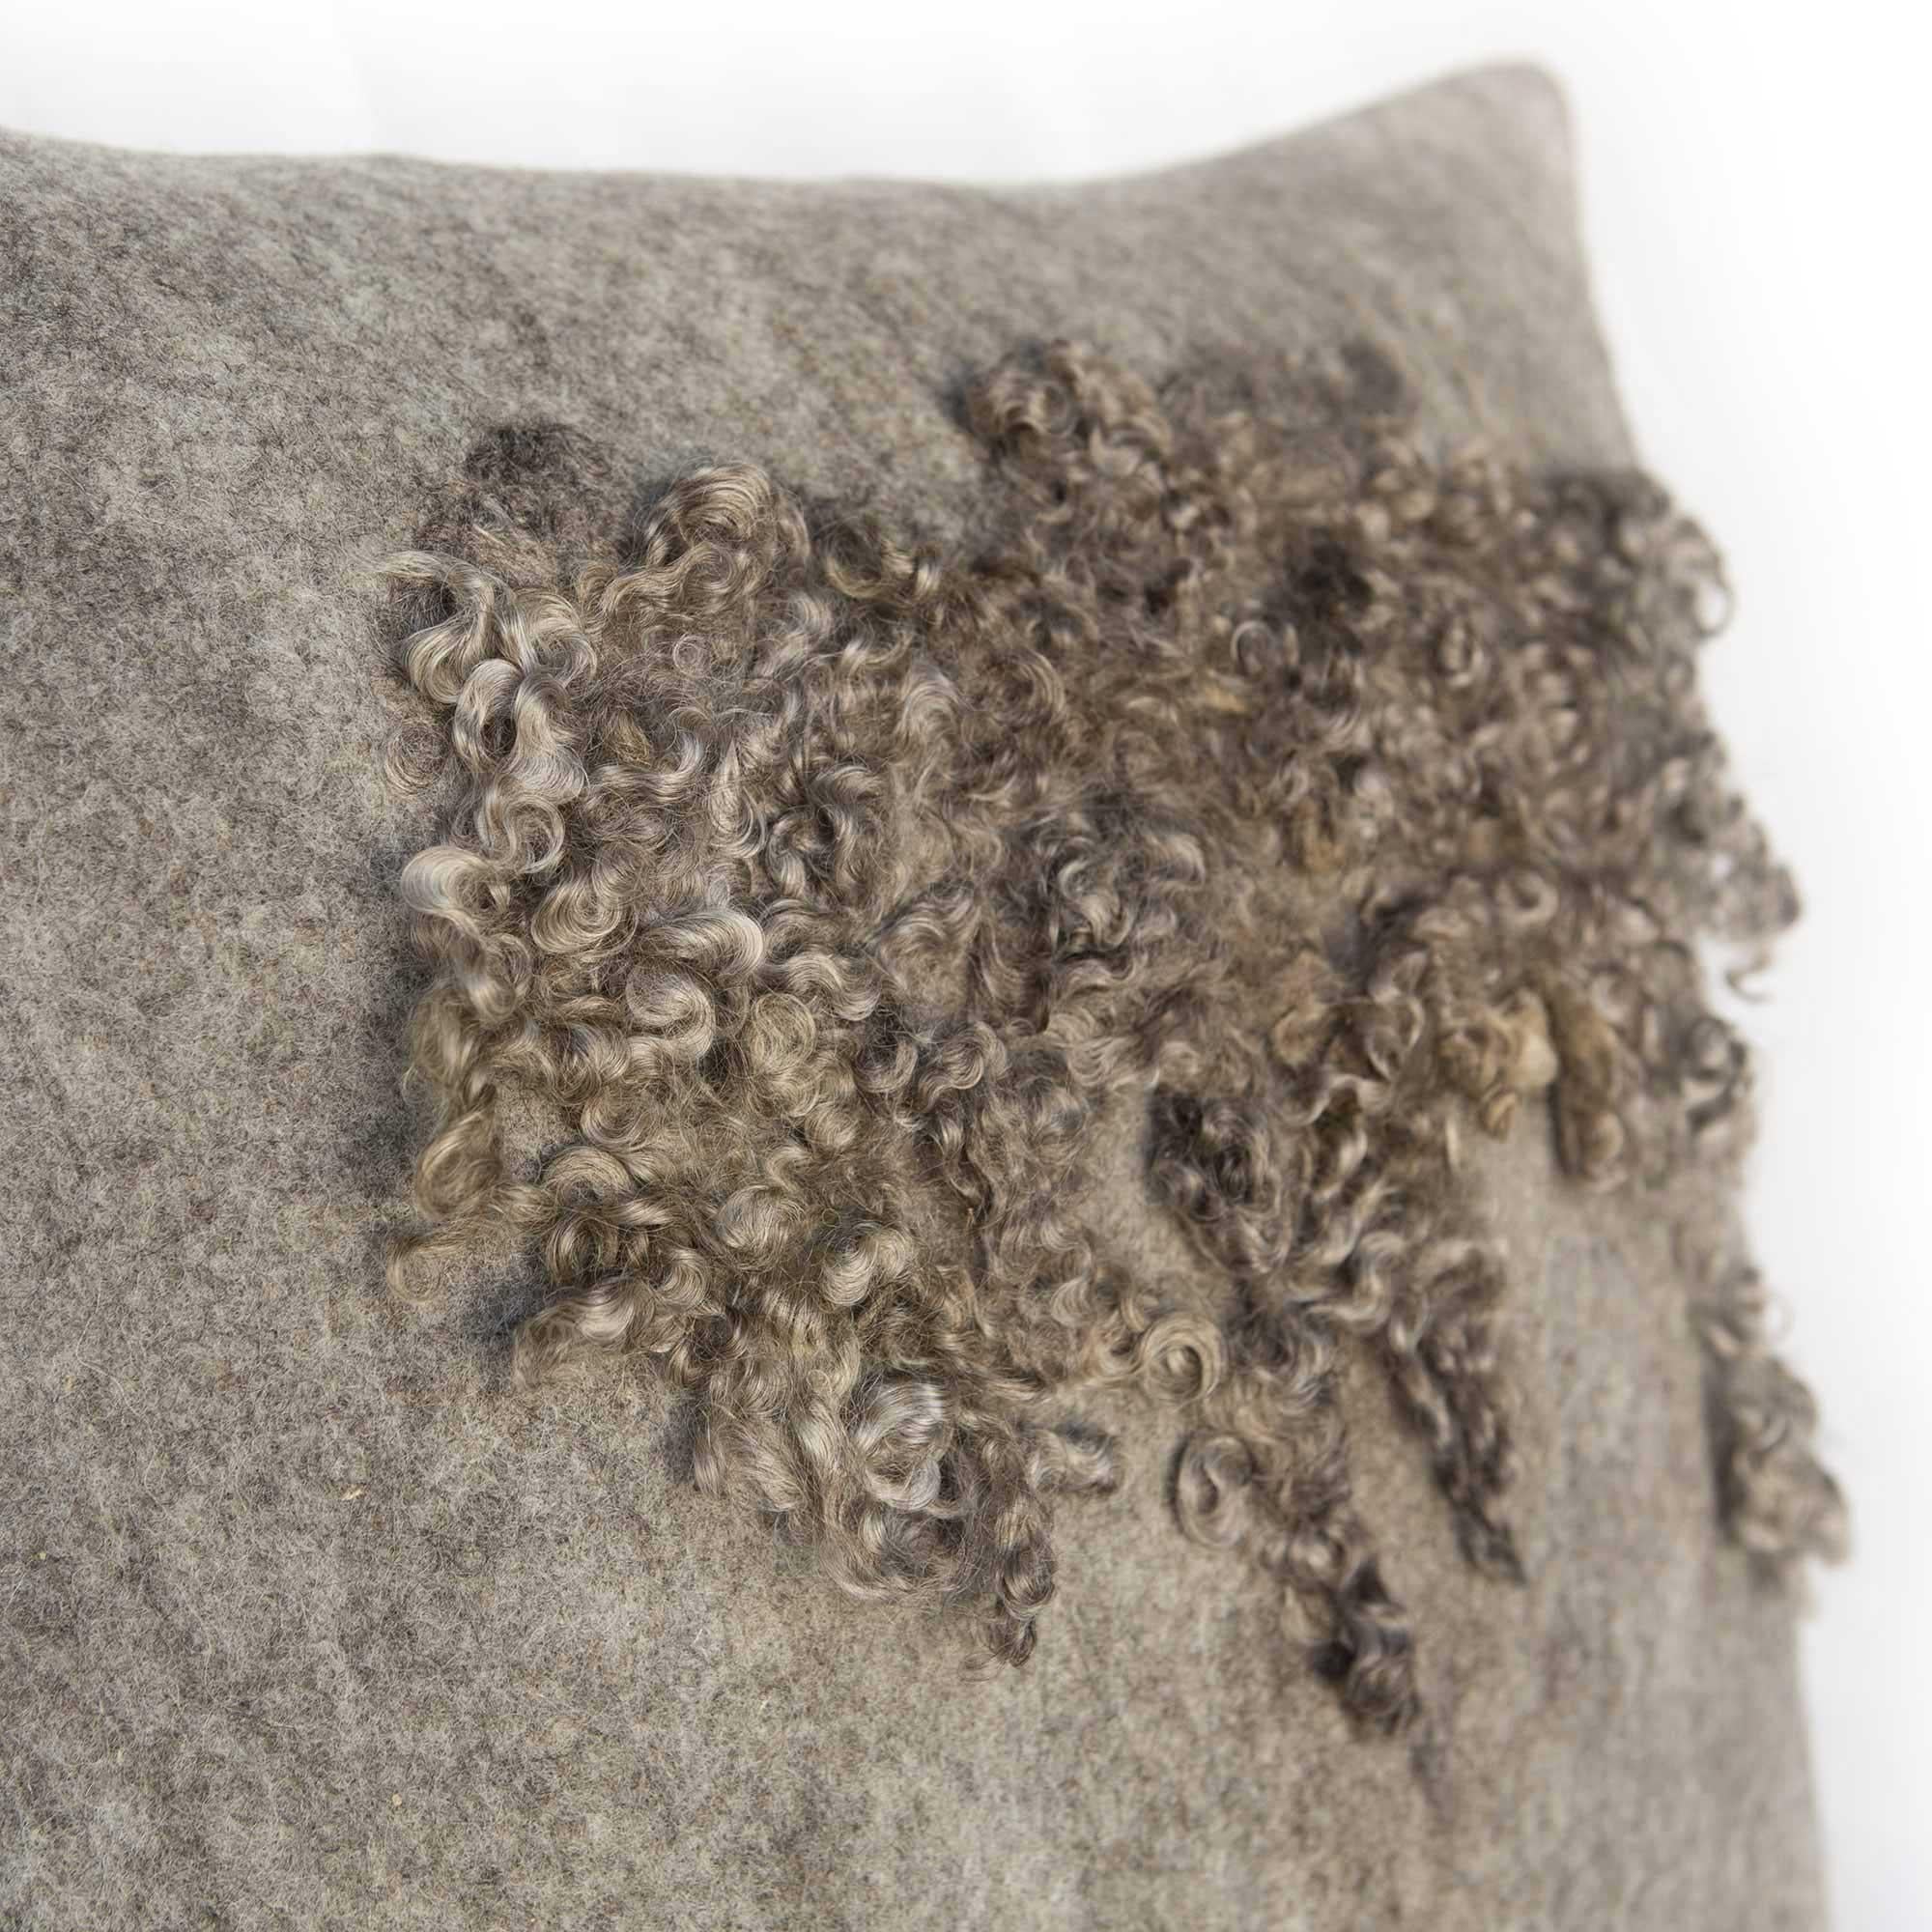 Milled in JG Switzer's design workshop, this pillow is named after the sheep that adorn its face, the soft, long-locked Wensleydale. Fabric Shetland wool, from Heritage Sheep on the 